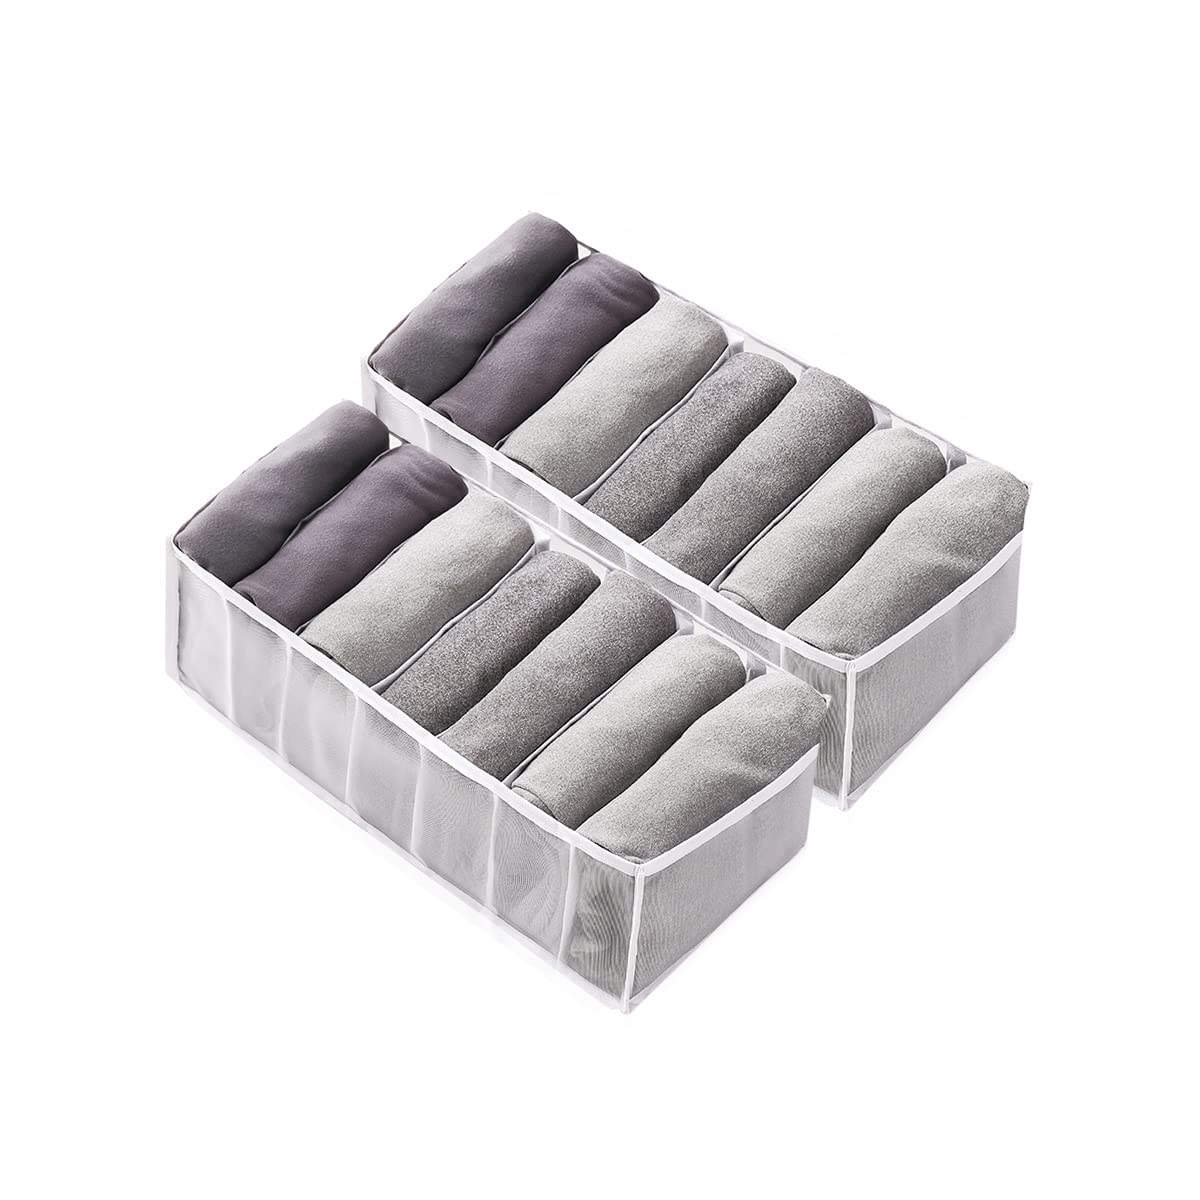 2 Pack Clothes Organizer 7 Grids Drawers Storage Box